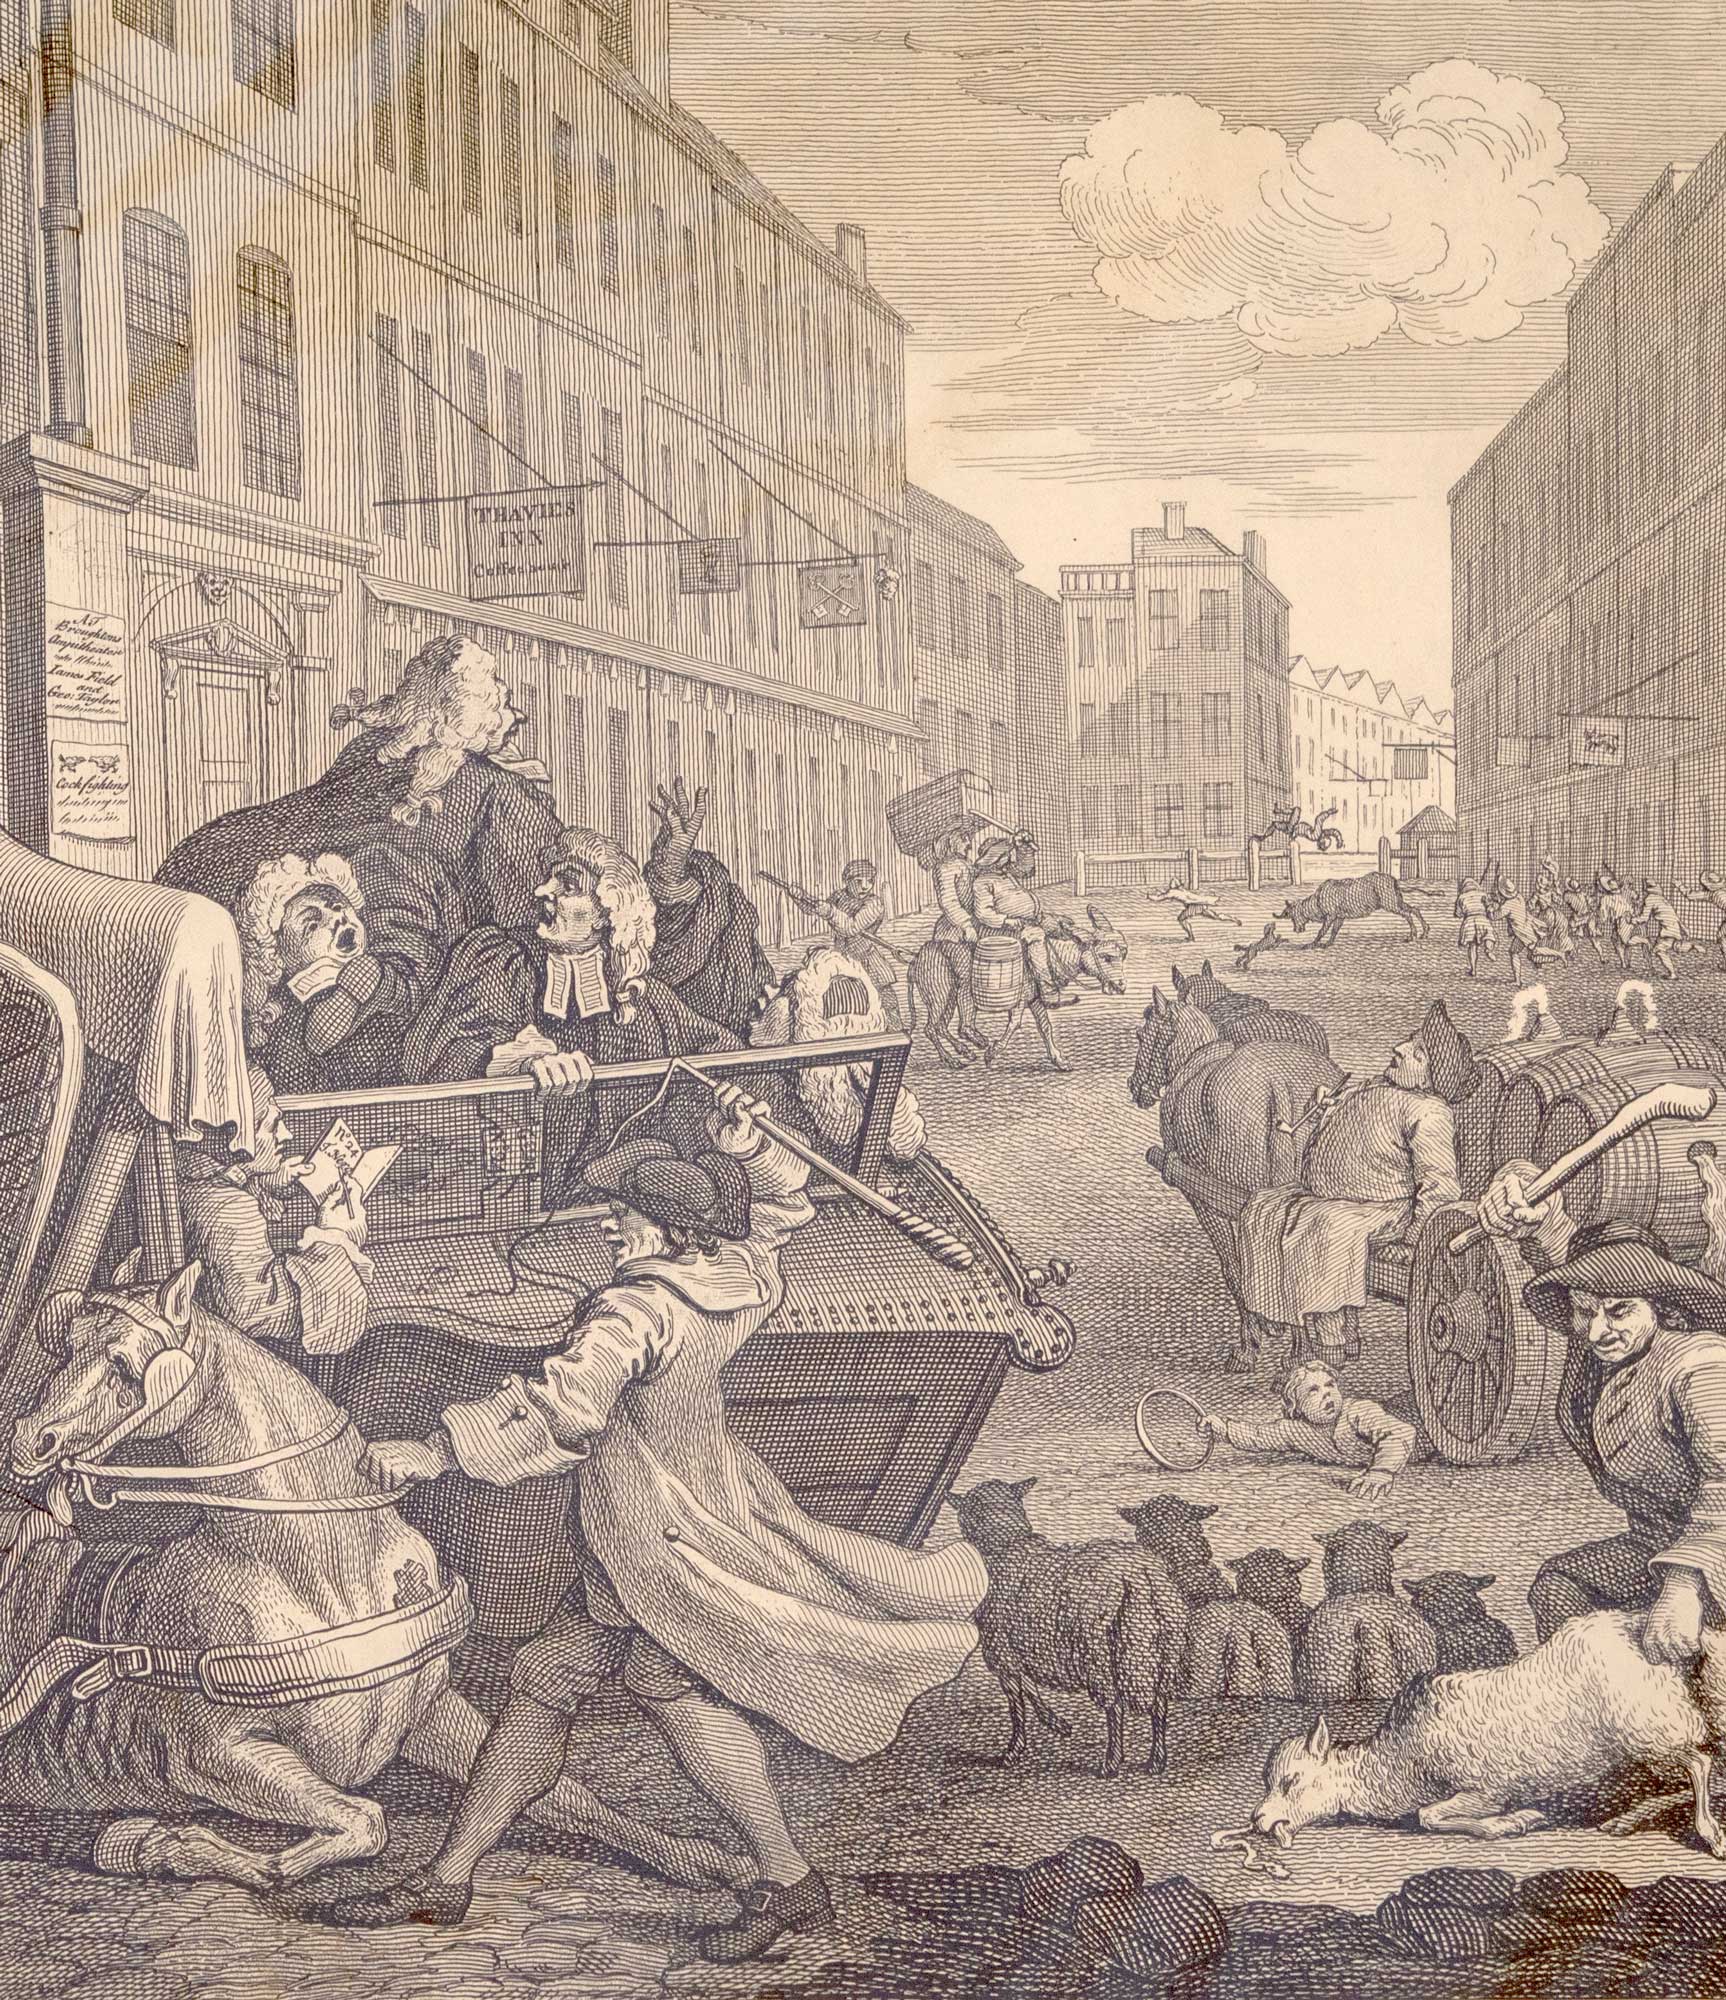 DETAIL: William Hogarth - The Second Stage of Cruelty